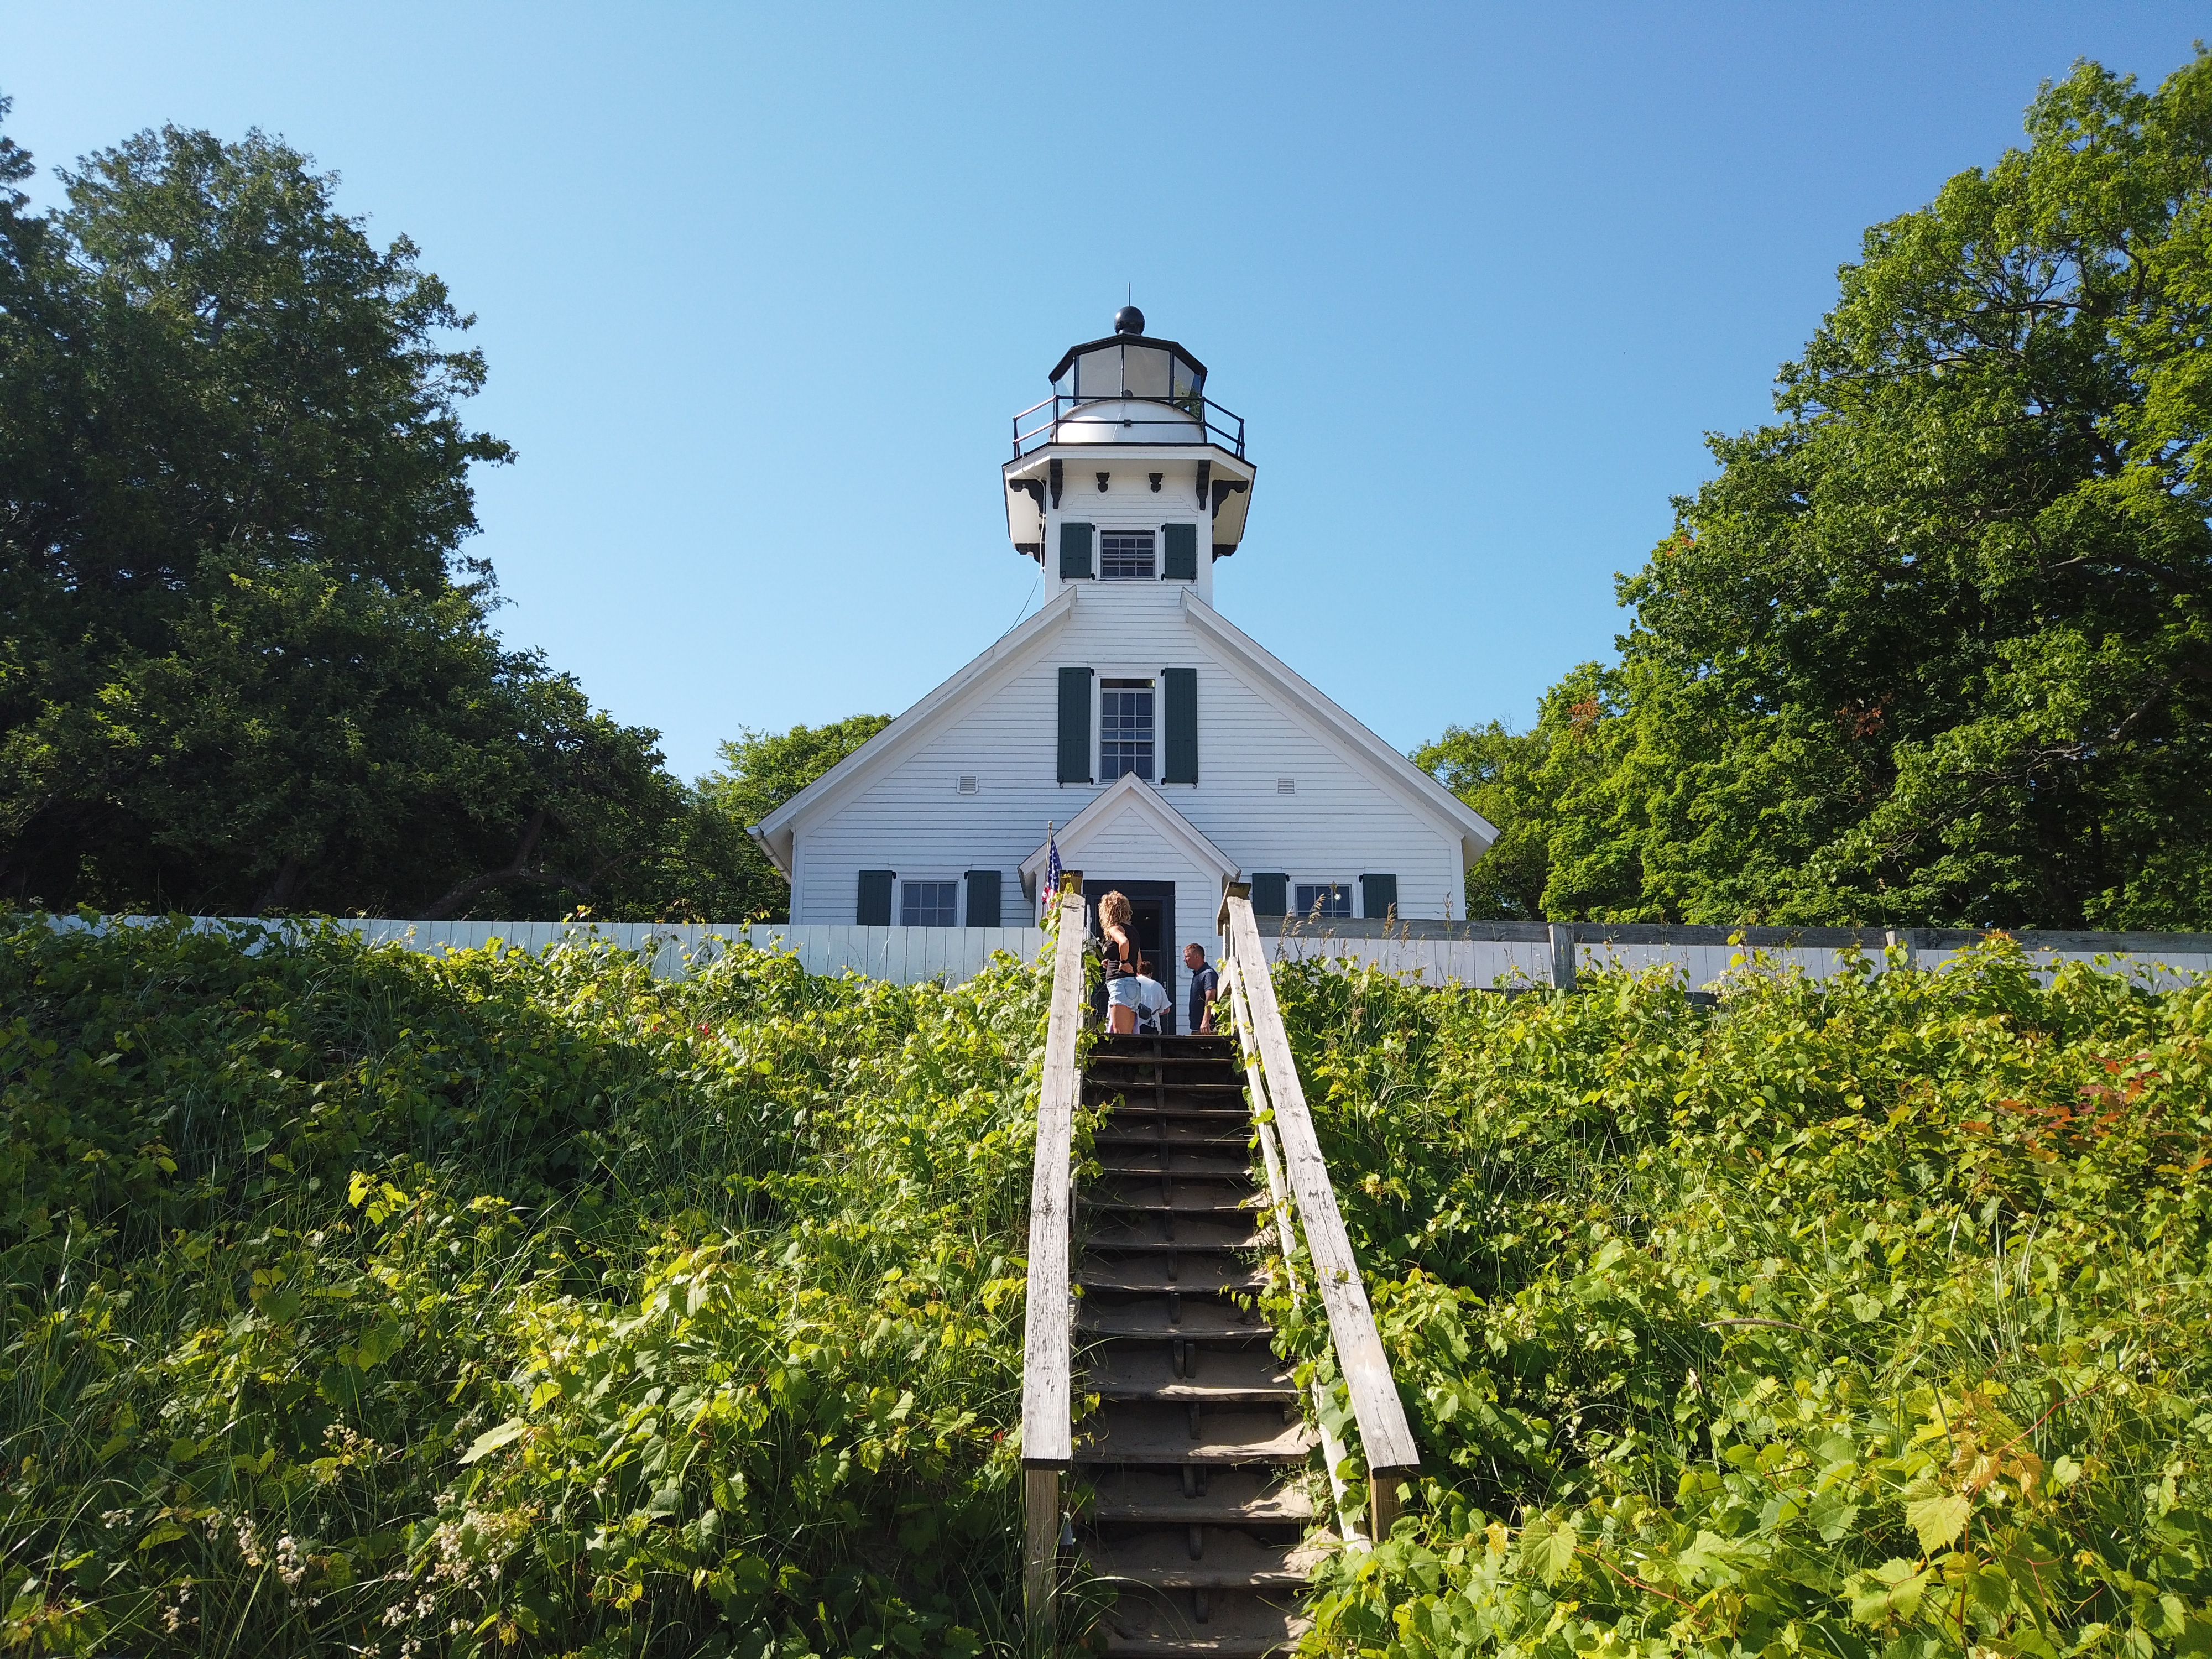 The lighthouse at Lighthouse Point